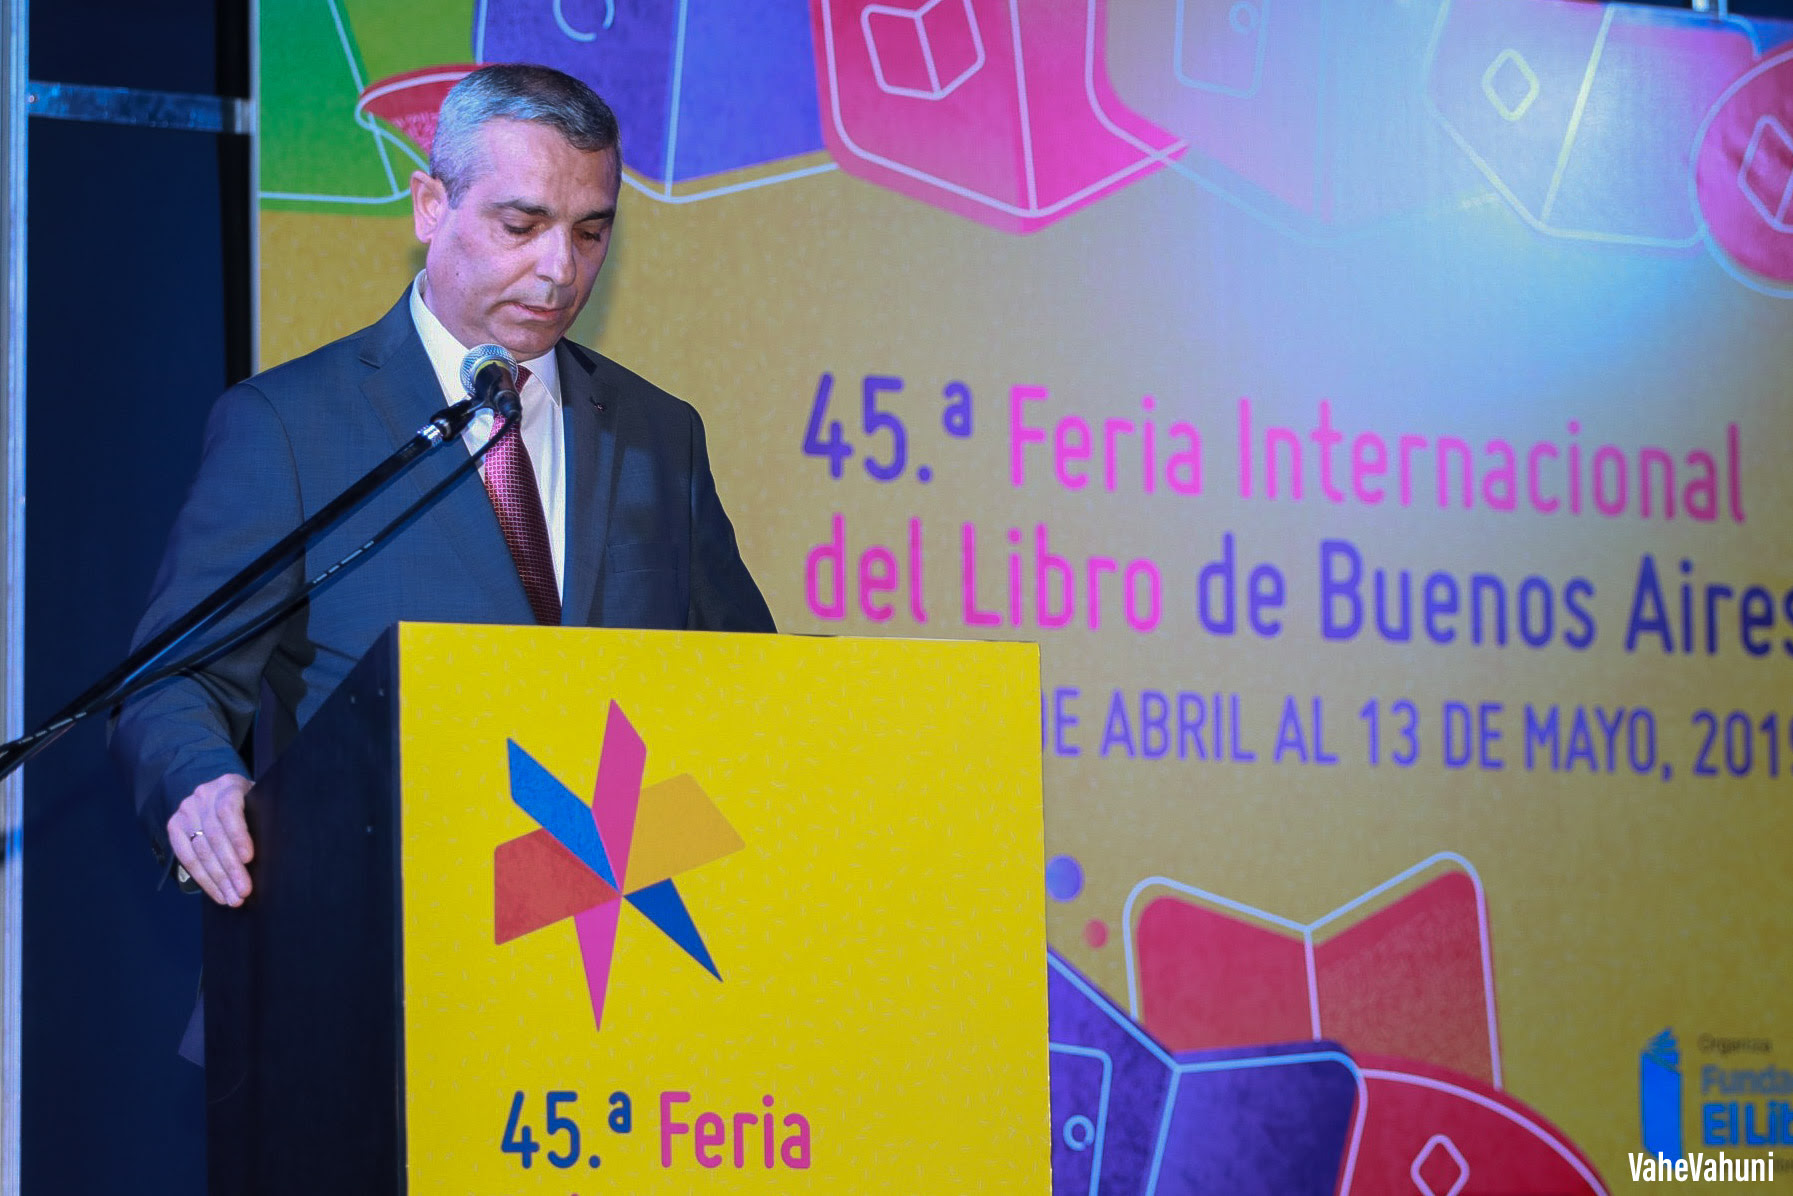 Masis Mayilian Delivered a Speech at the International Book Fair in Buenos Aires